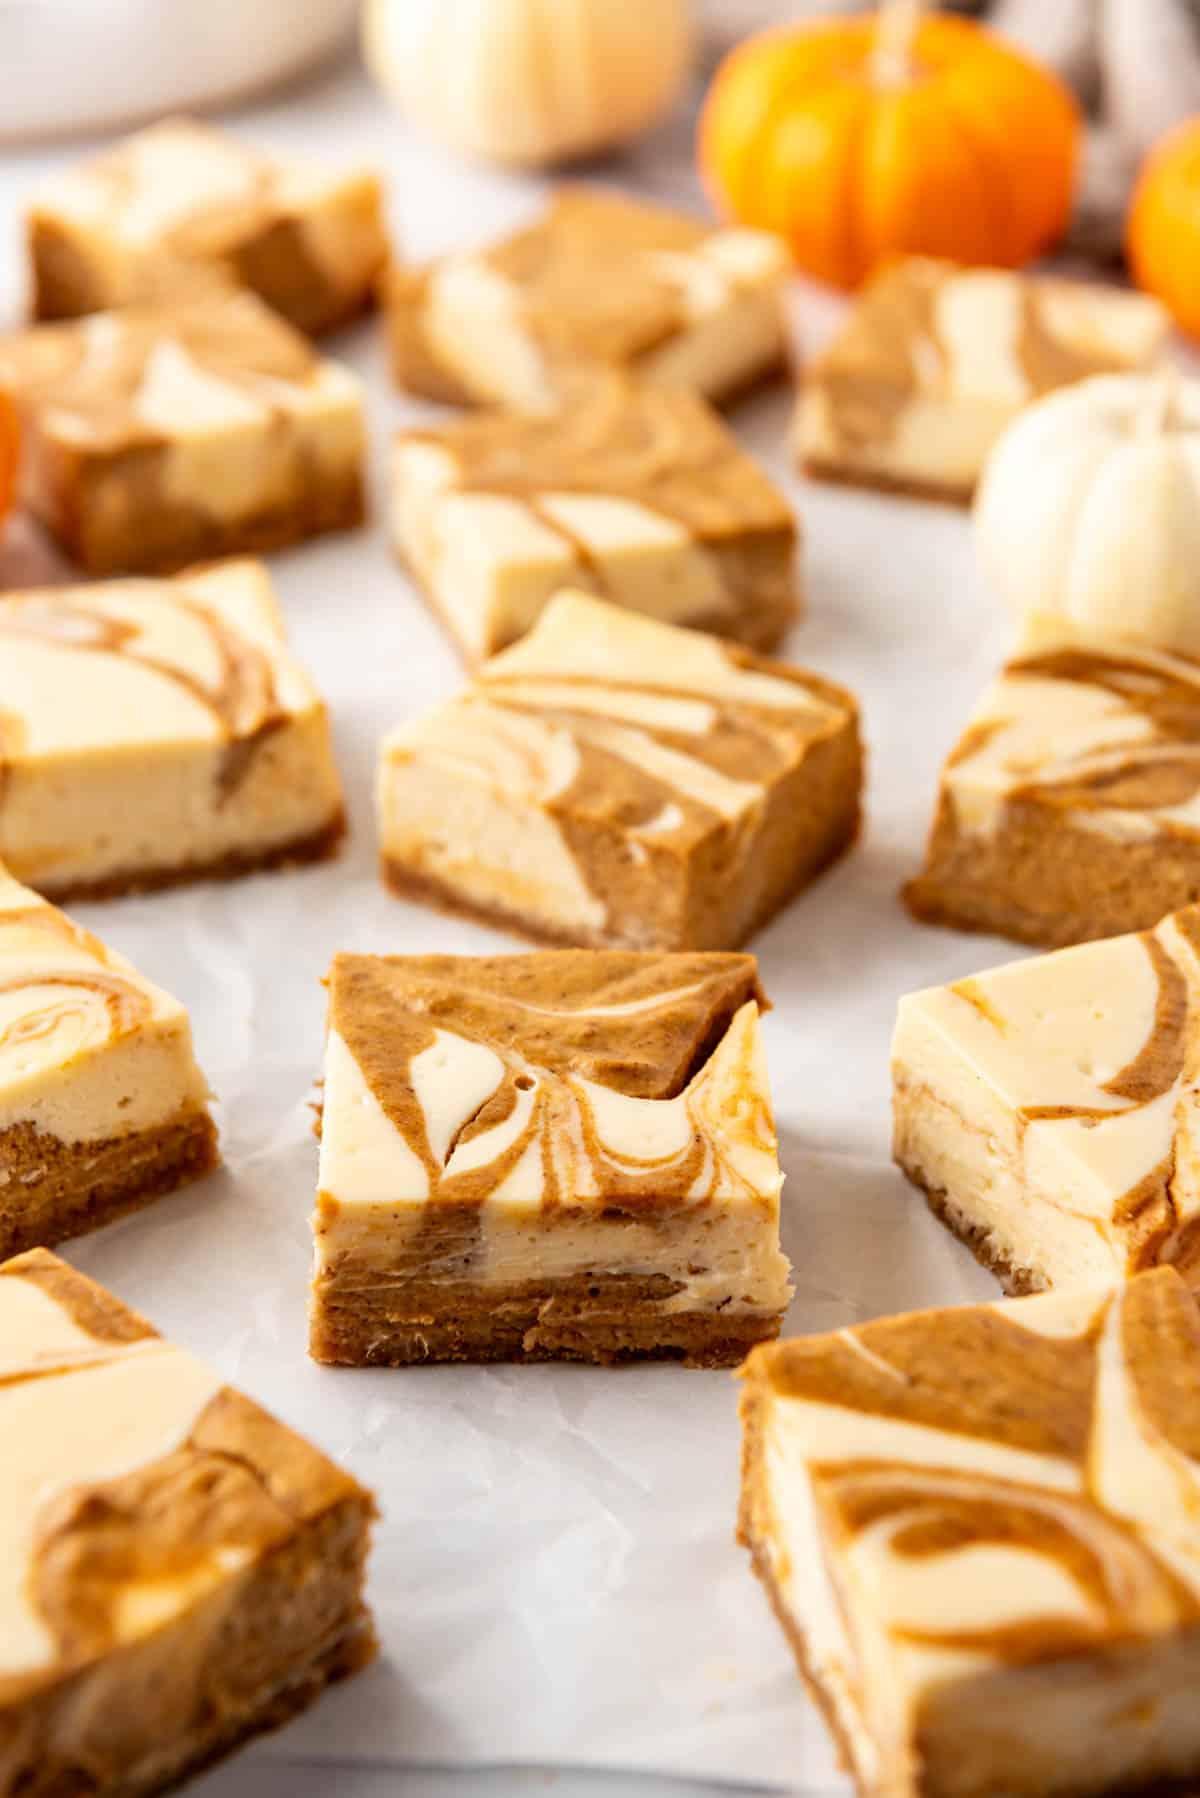 An image of pumpkin cheesecake bars cut into squares.